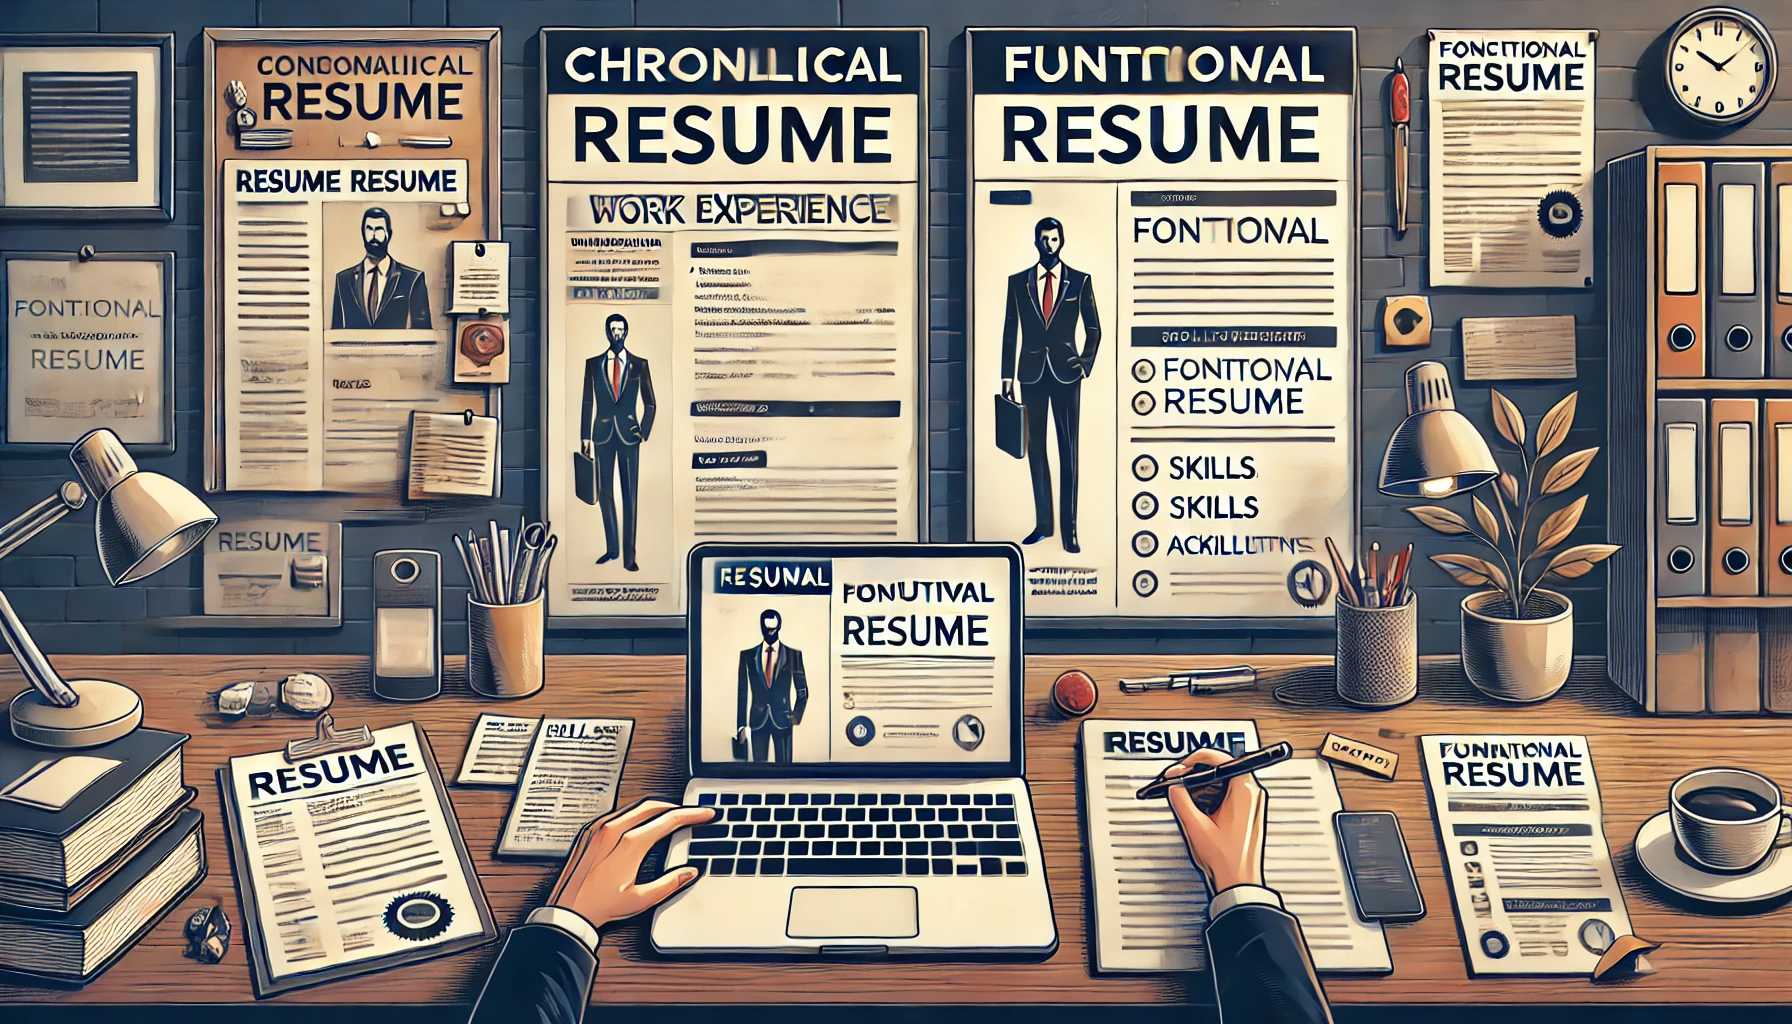 Chronological vs. Functional Resumes: Choosing the Right Format for Your Career Journey